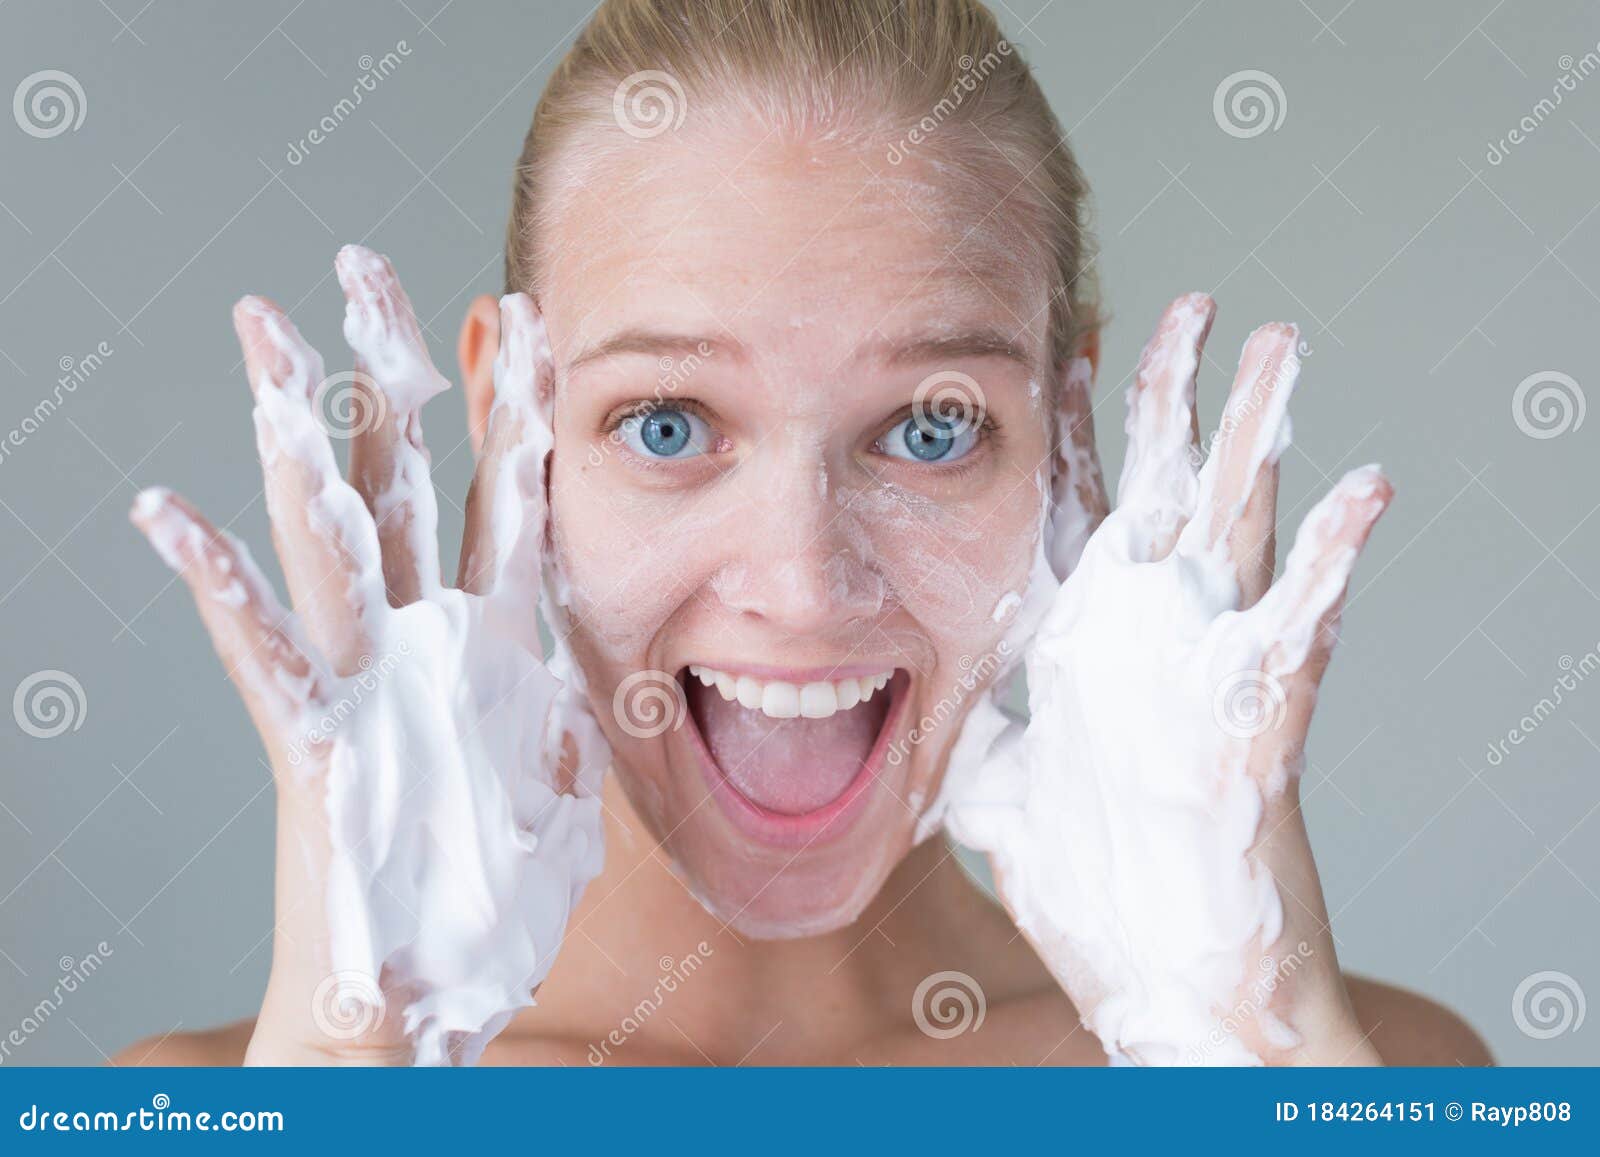 Beautiful Woman Washing Her Face with Water and Suds Smiling. Hygiene ...